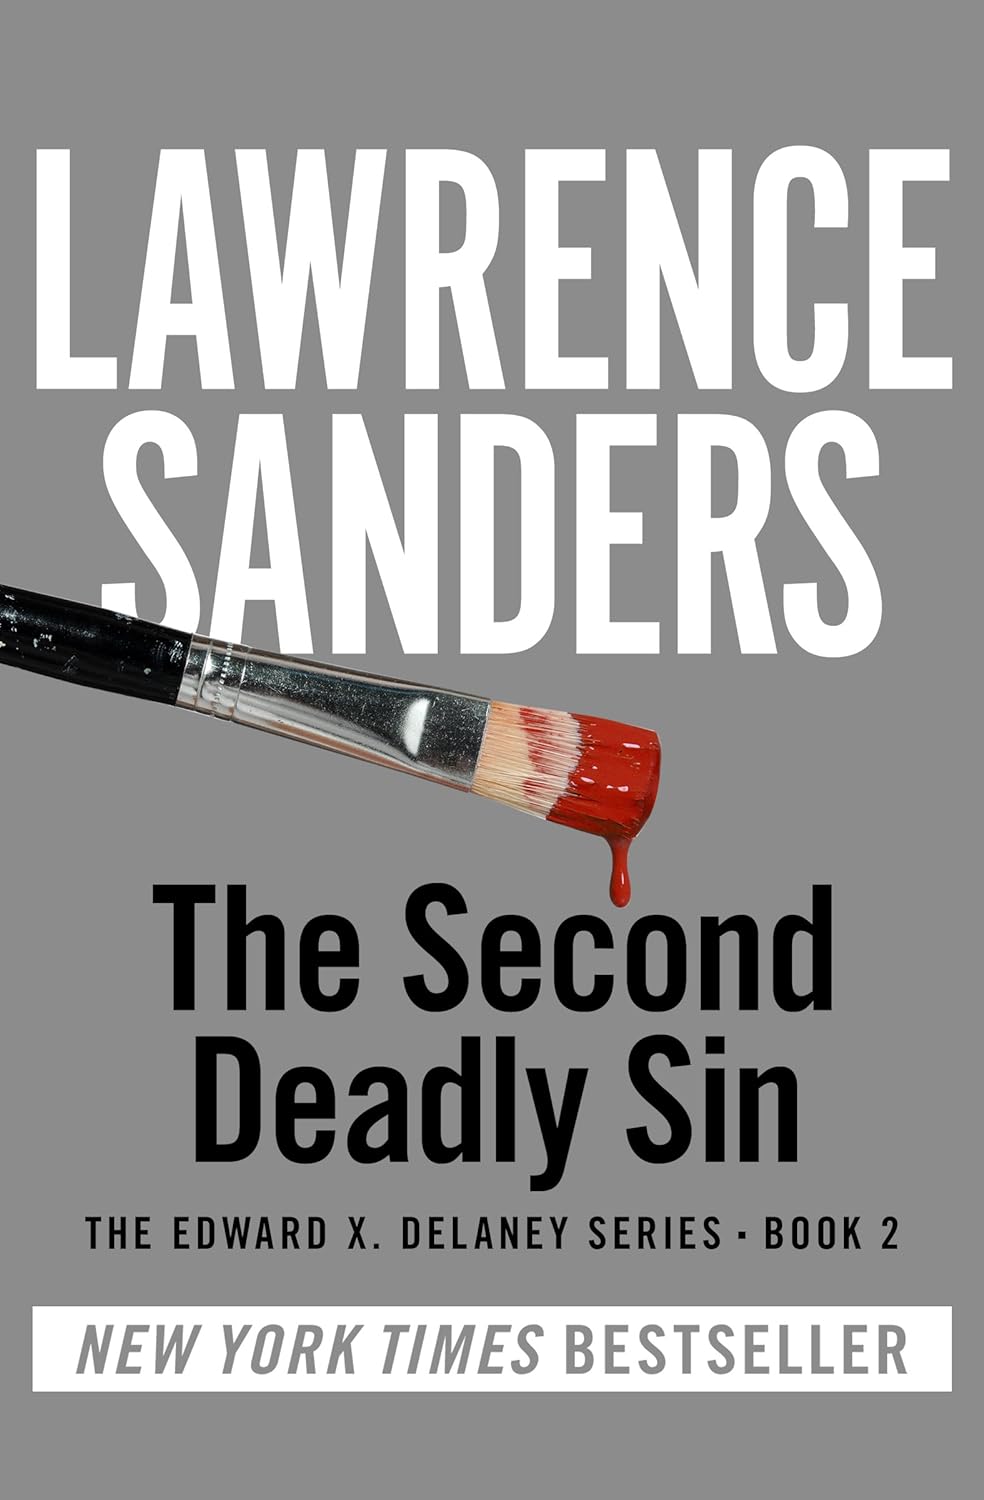 The Second Deadly Sin book cover